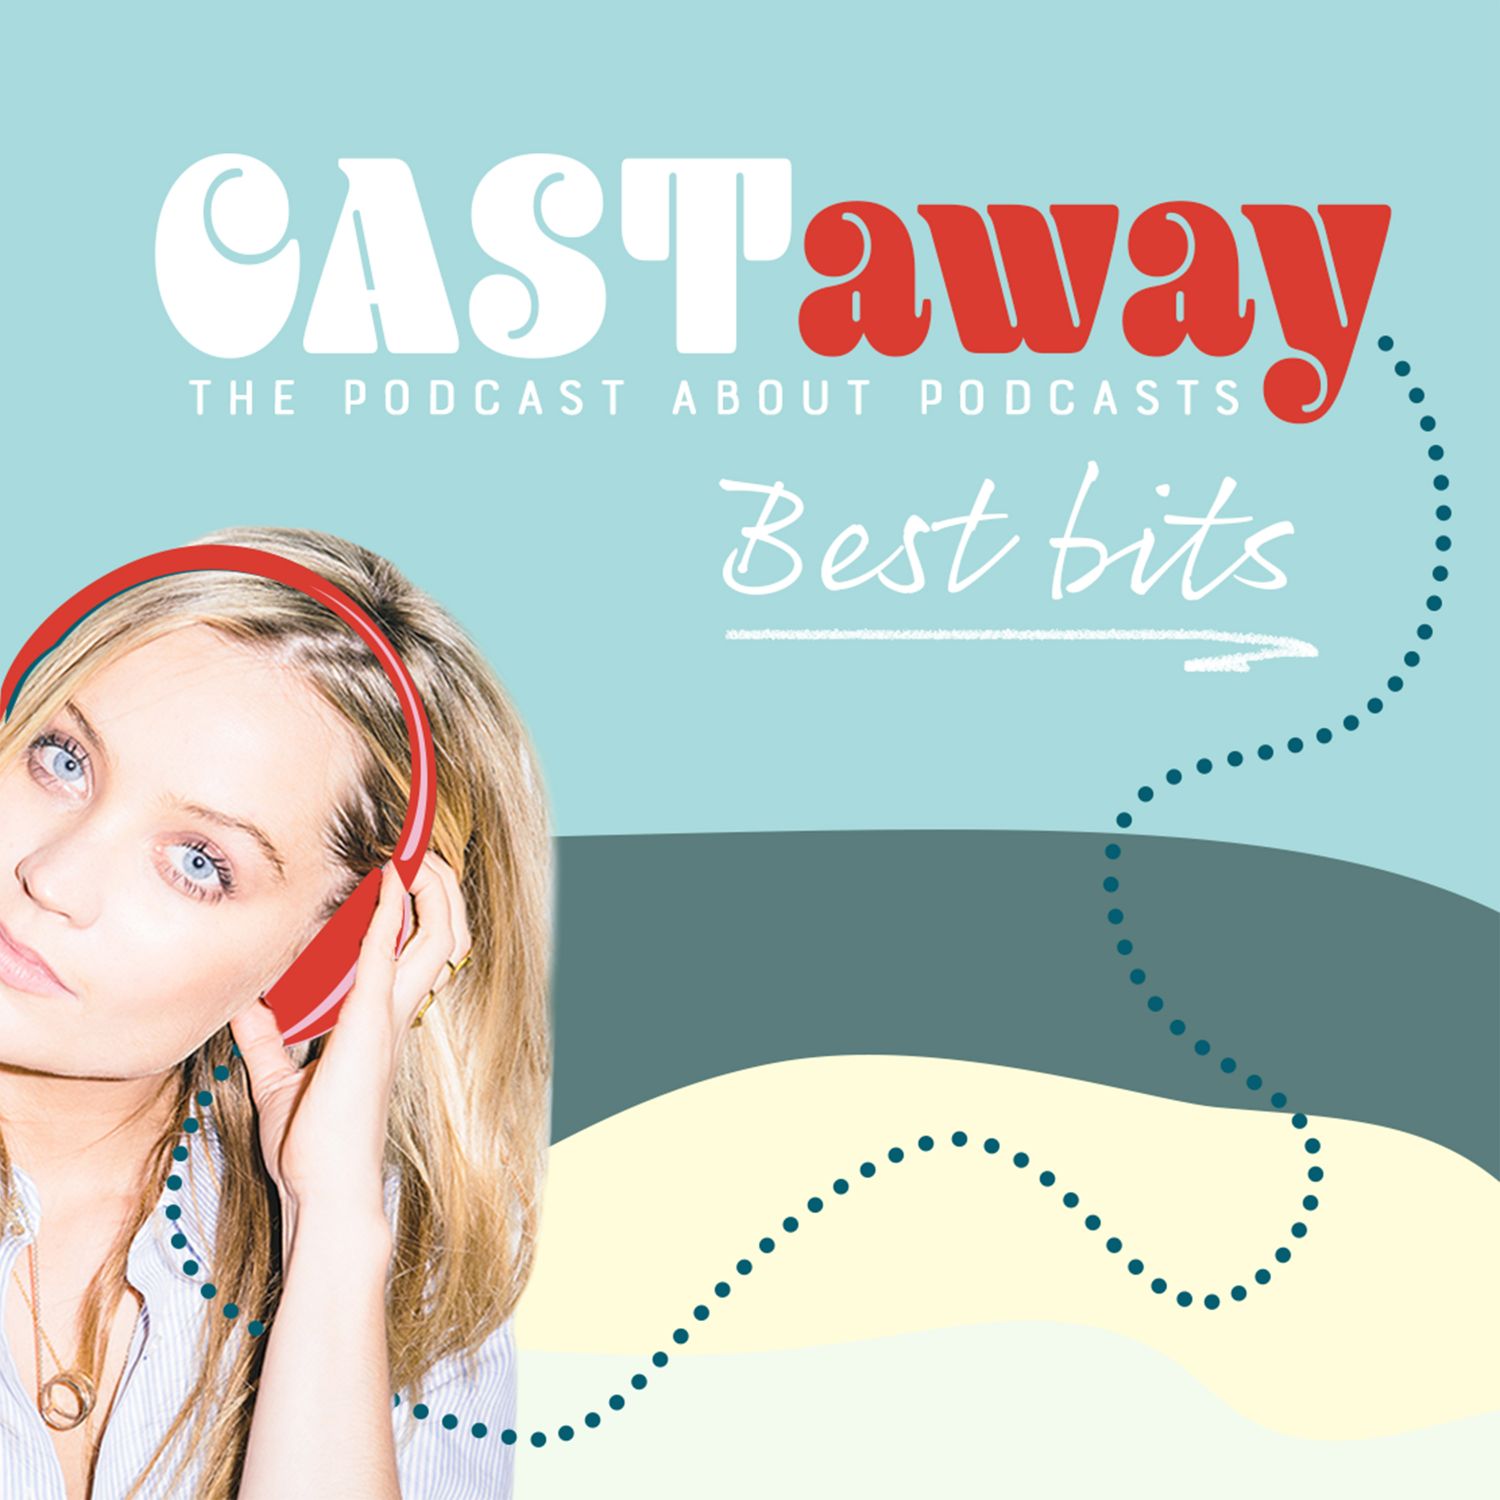 Castaway with Laura Whitmore